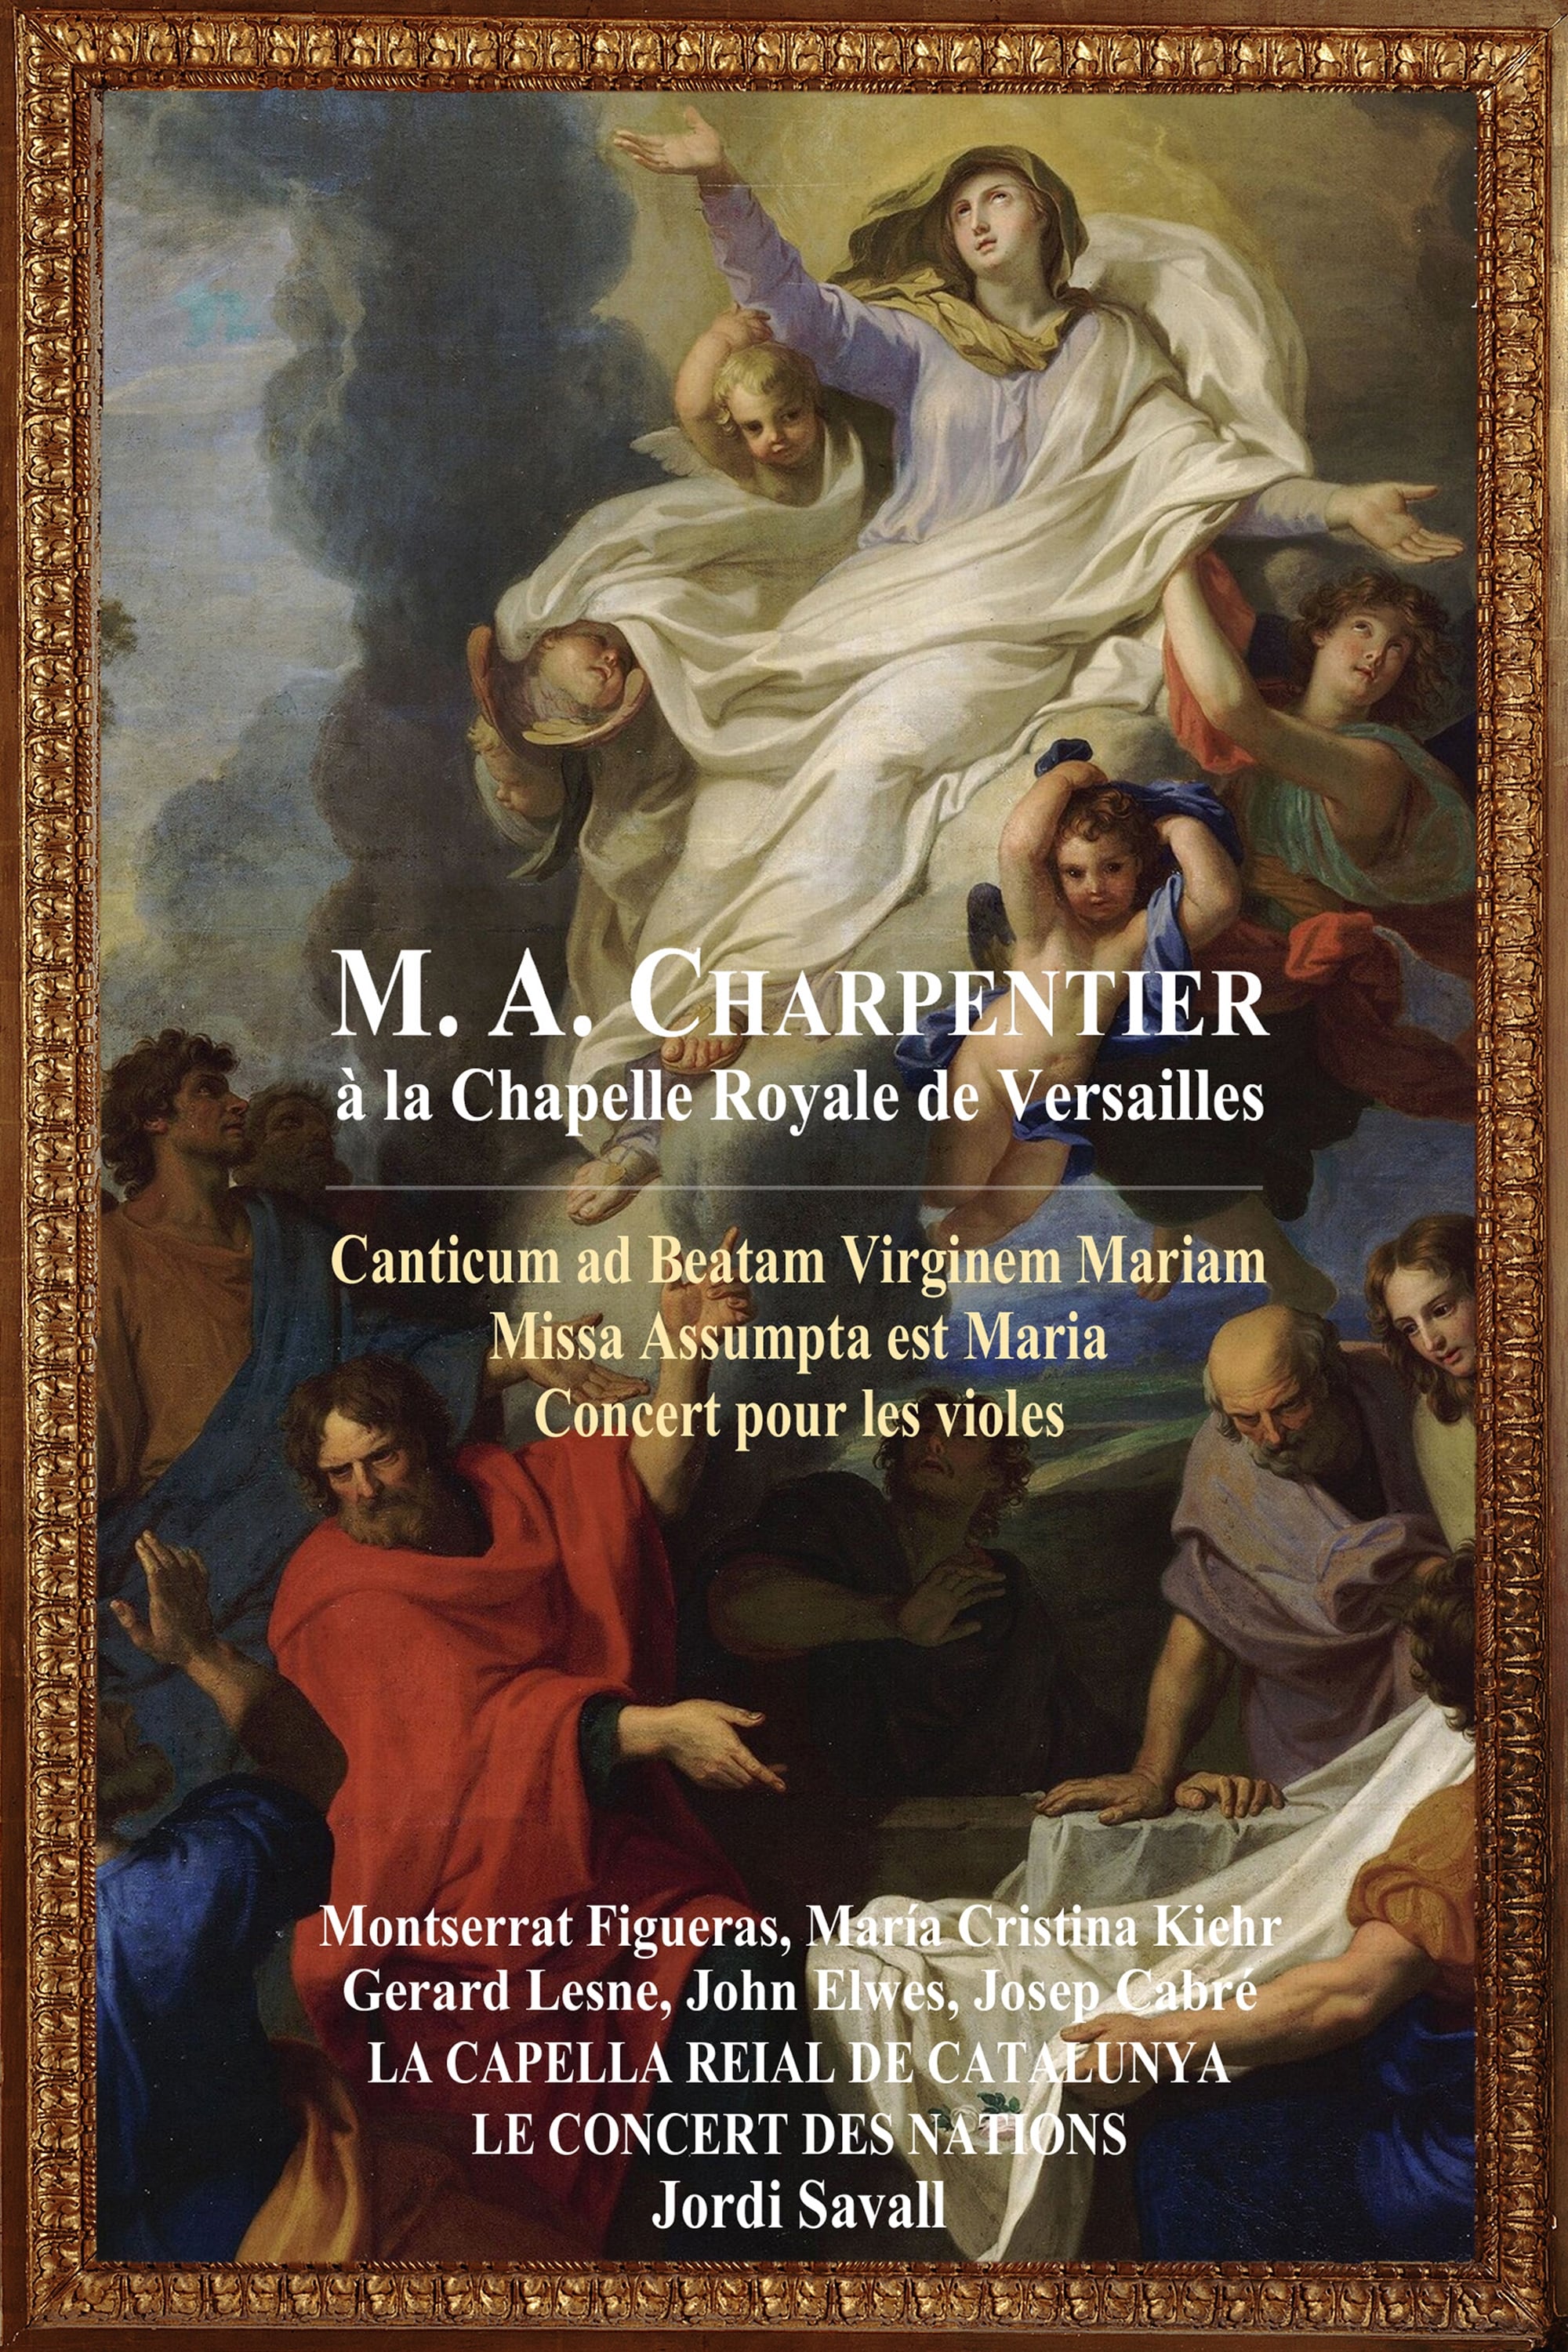 M.A Charpentier at the Royal Chapel of Versailles